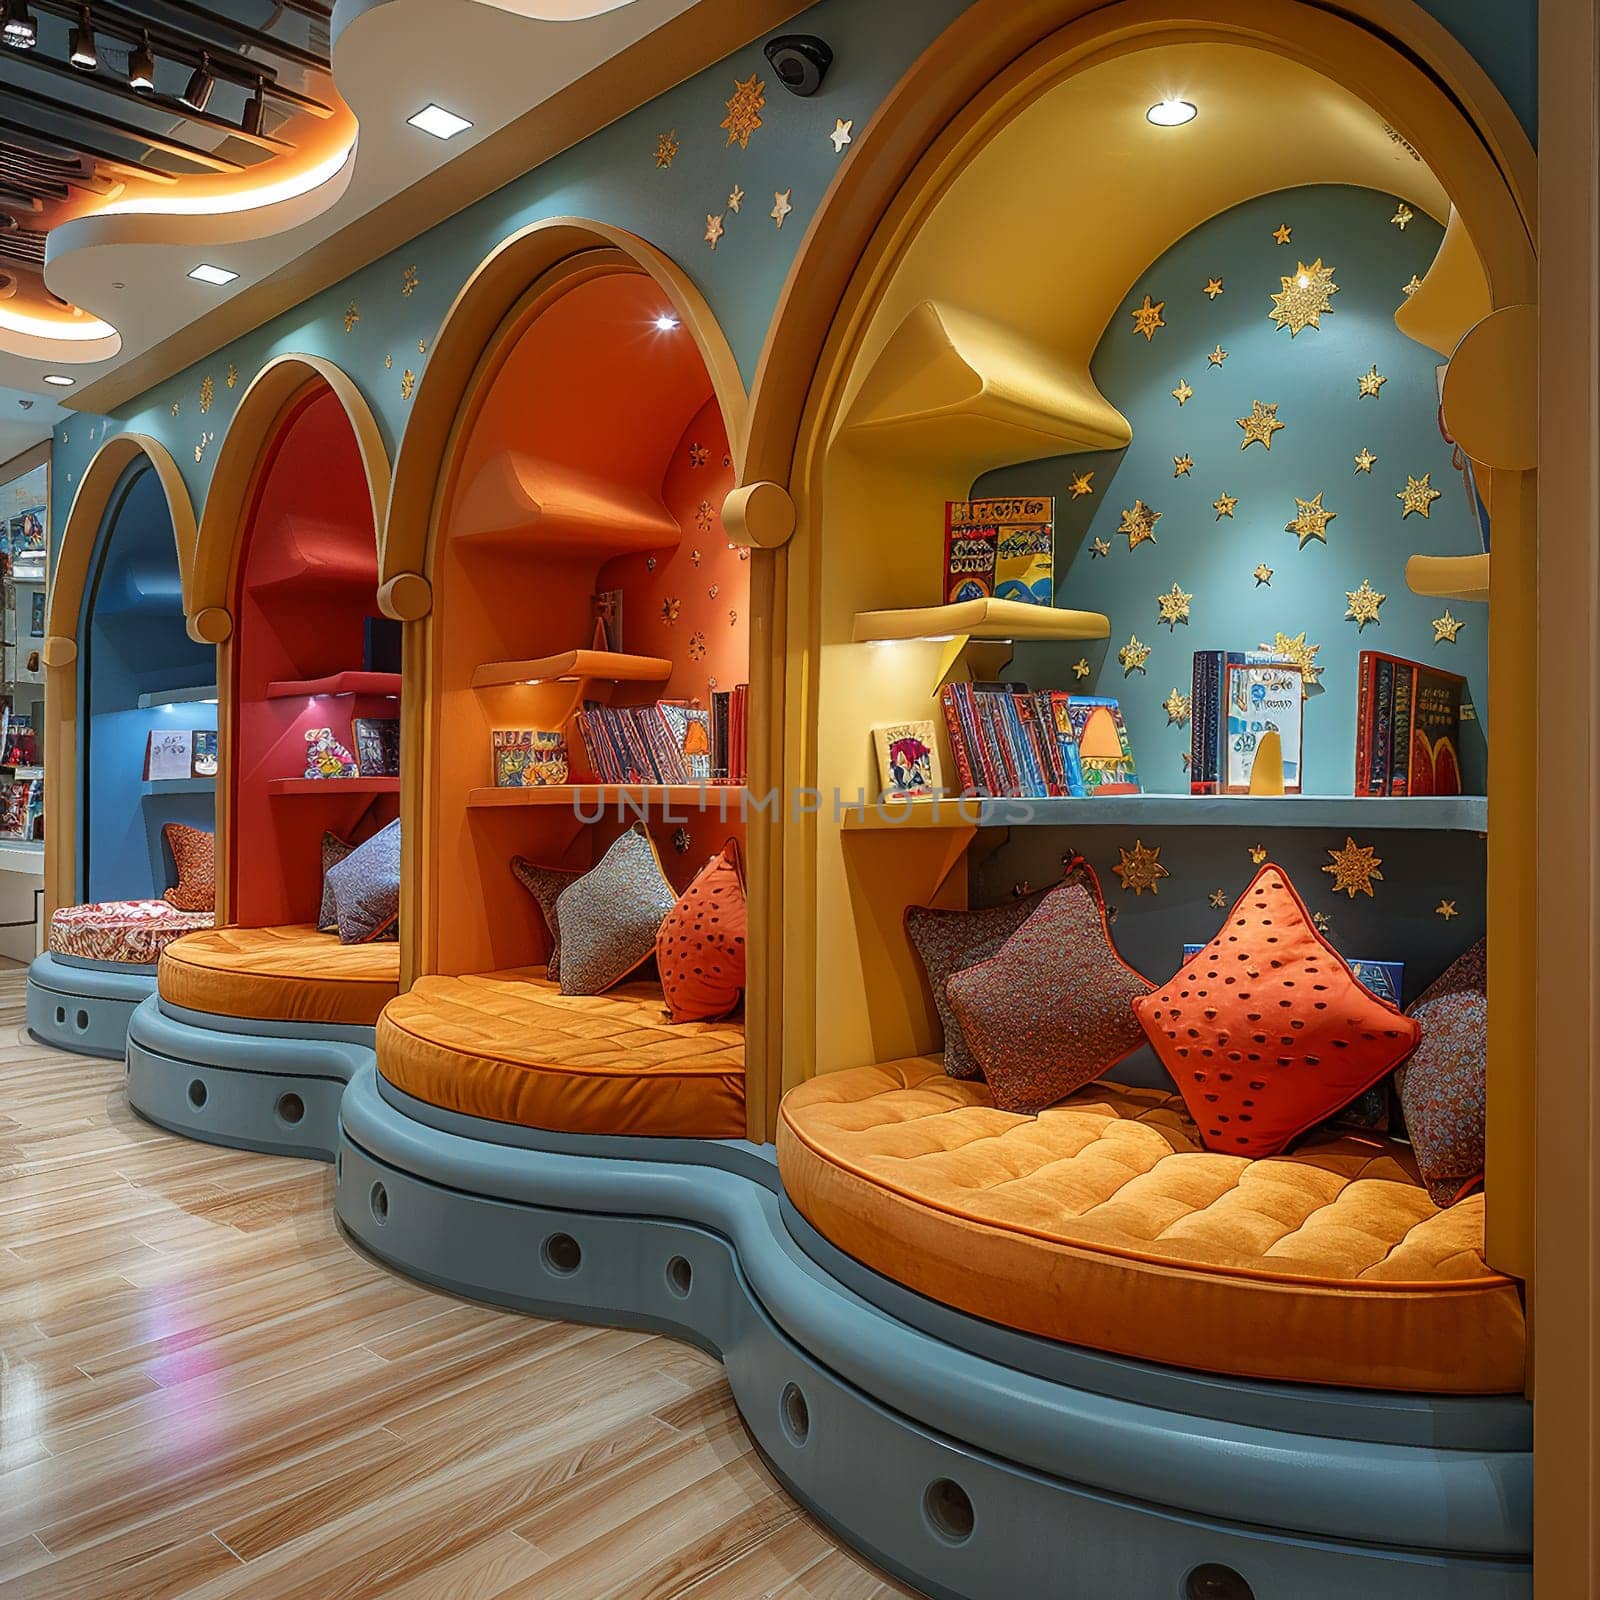 Interactive children's library with themed reading nooks and educational games.